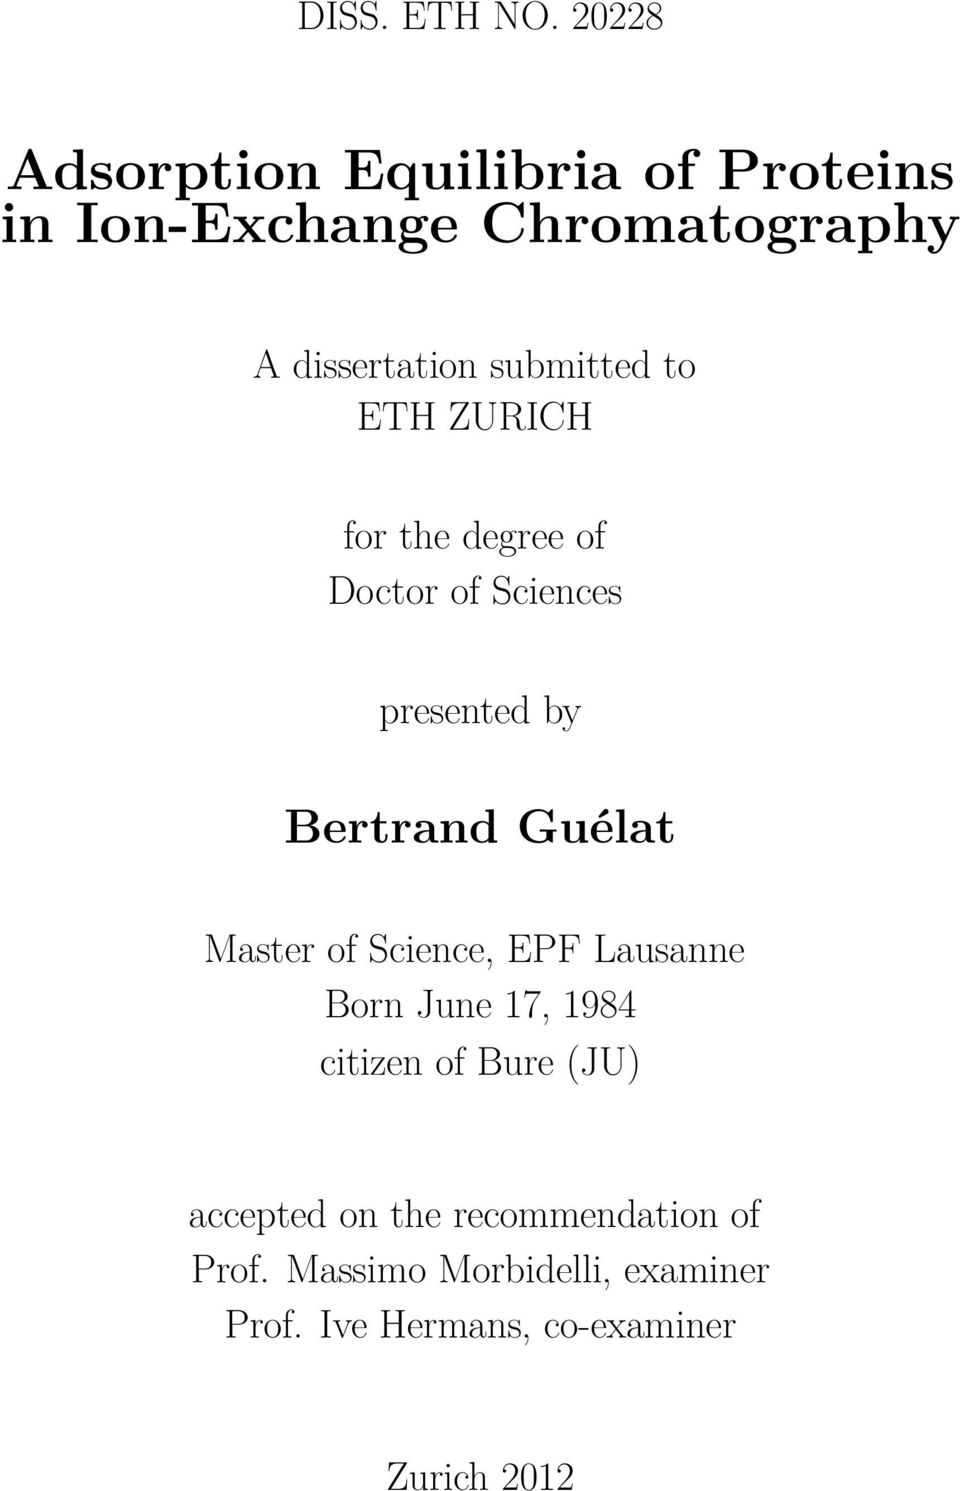 submitted to ETH ZURICH for the degree of Doctor of Sciences presented by Bertrand Guélat